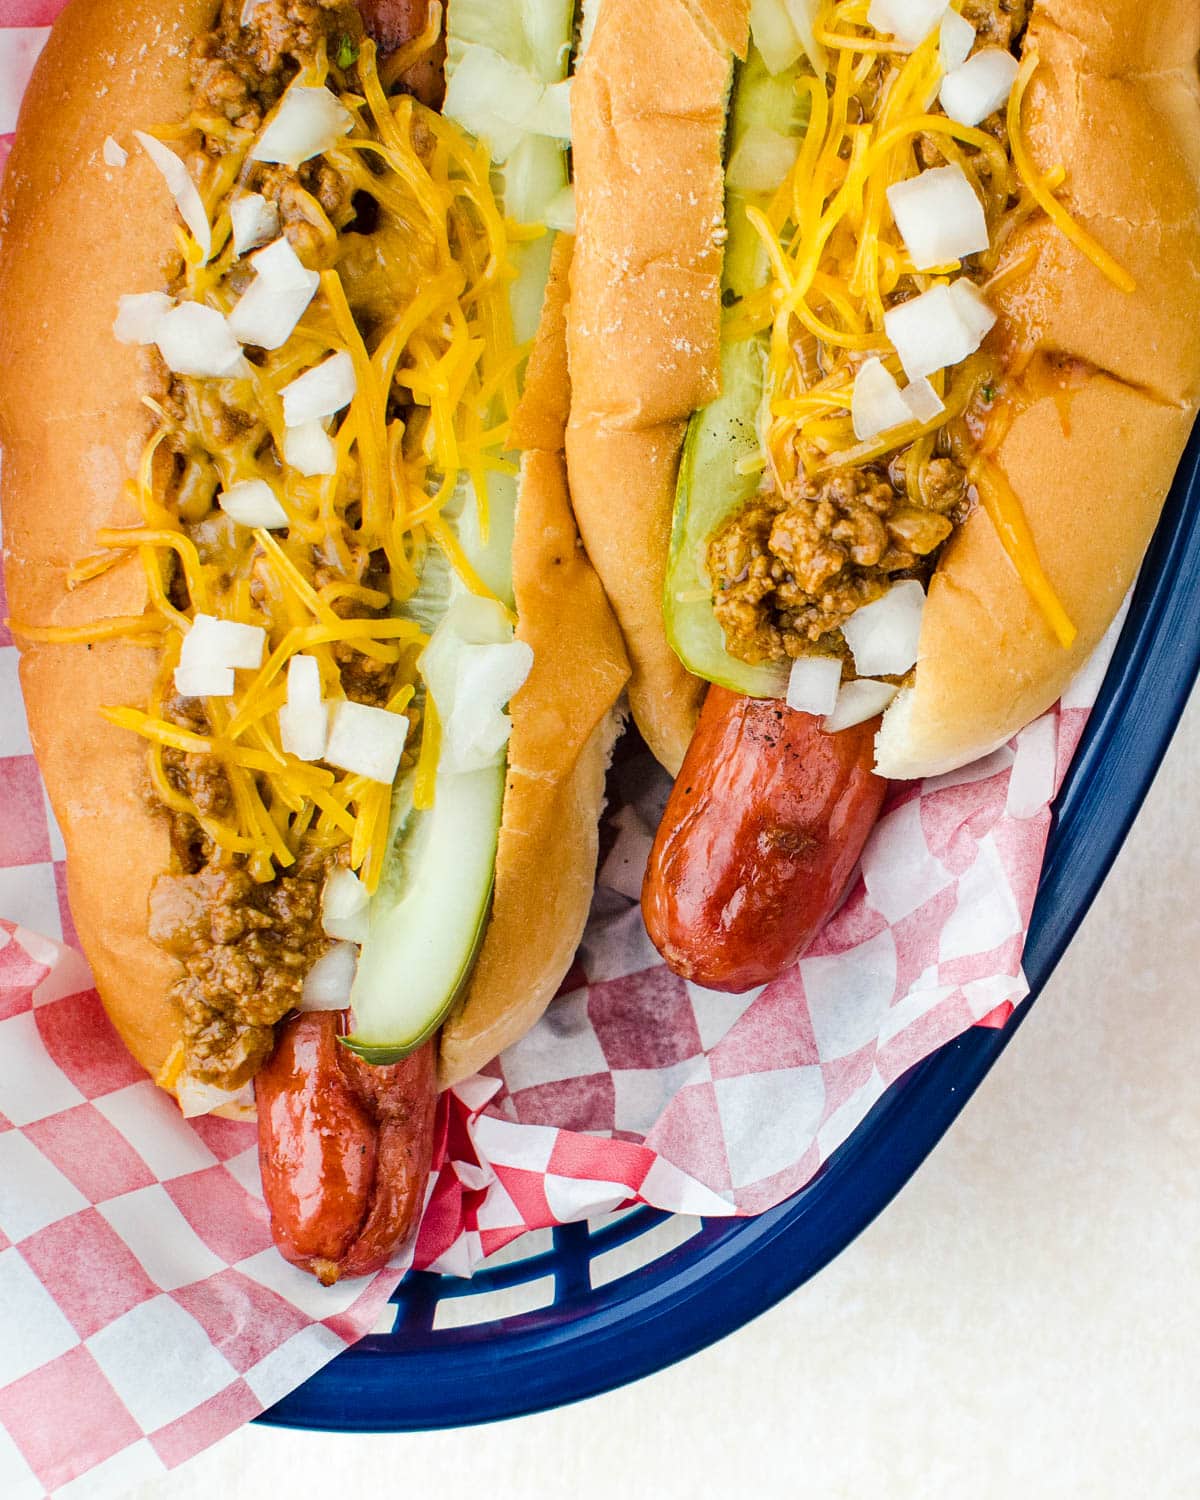 Chili dogs with onions and cheese.